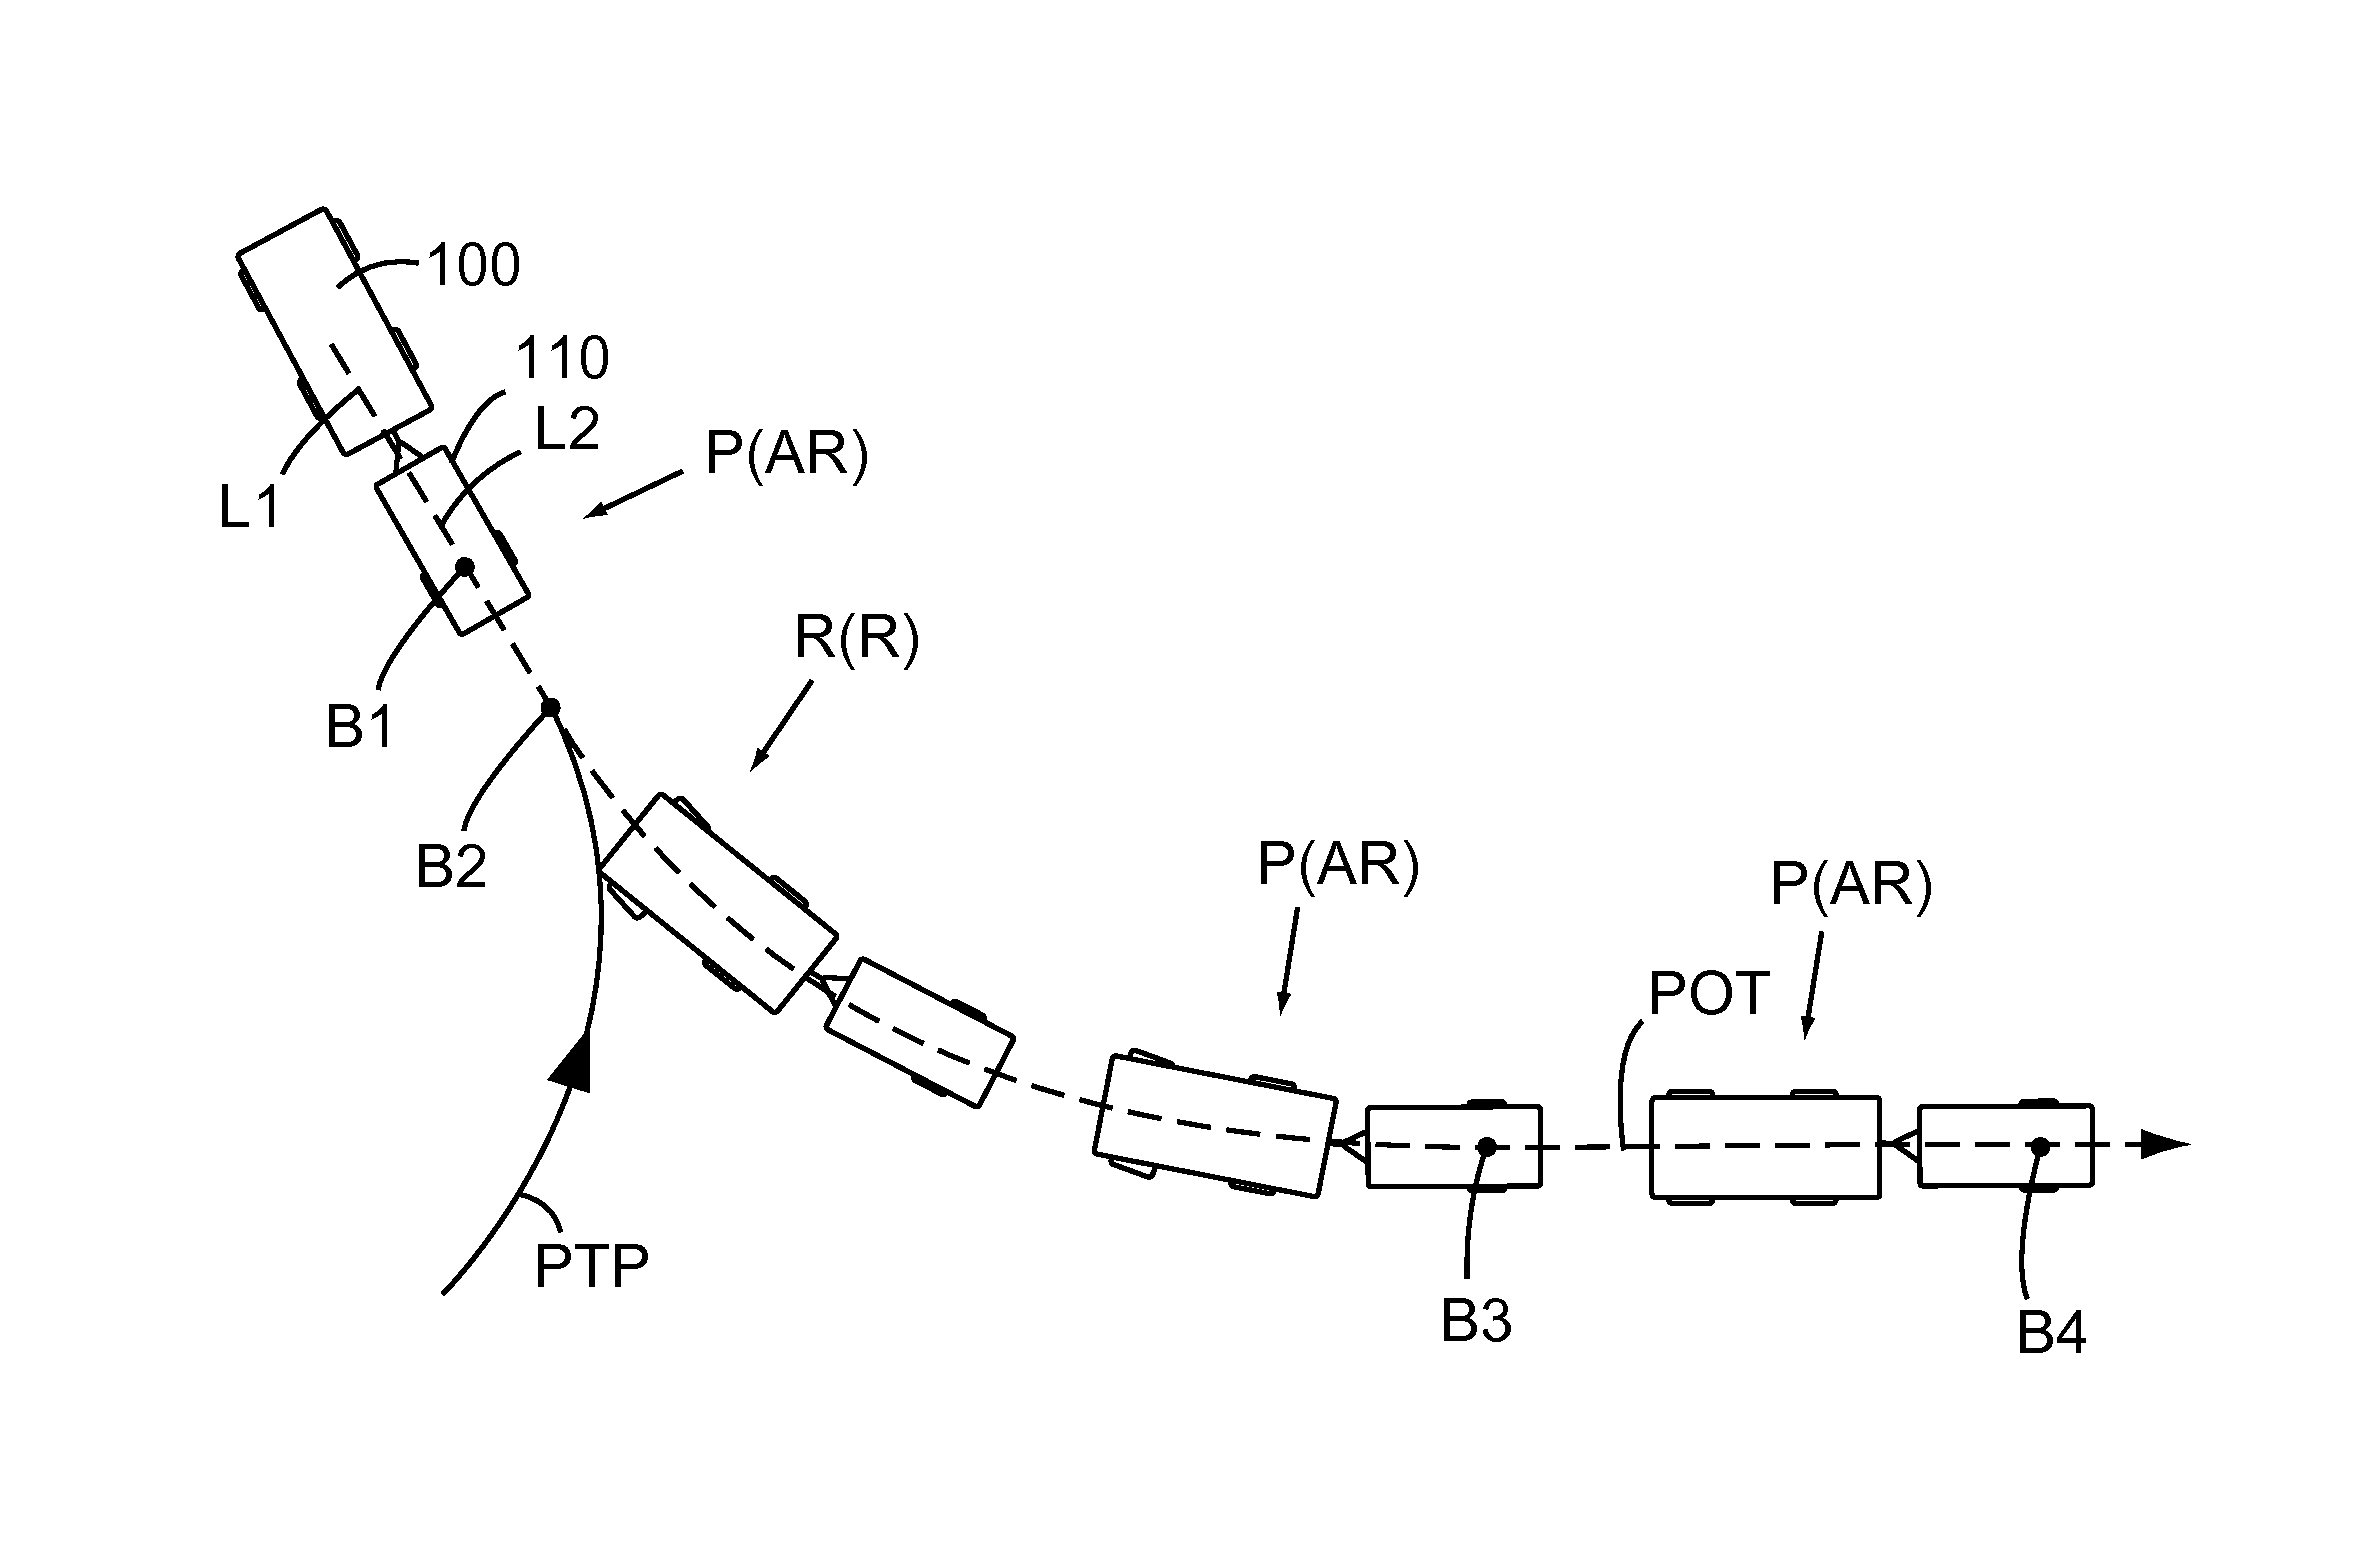 System and method of calibrating a trailer backup assist system